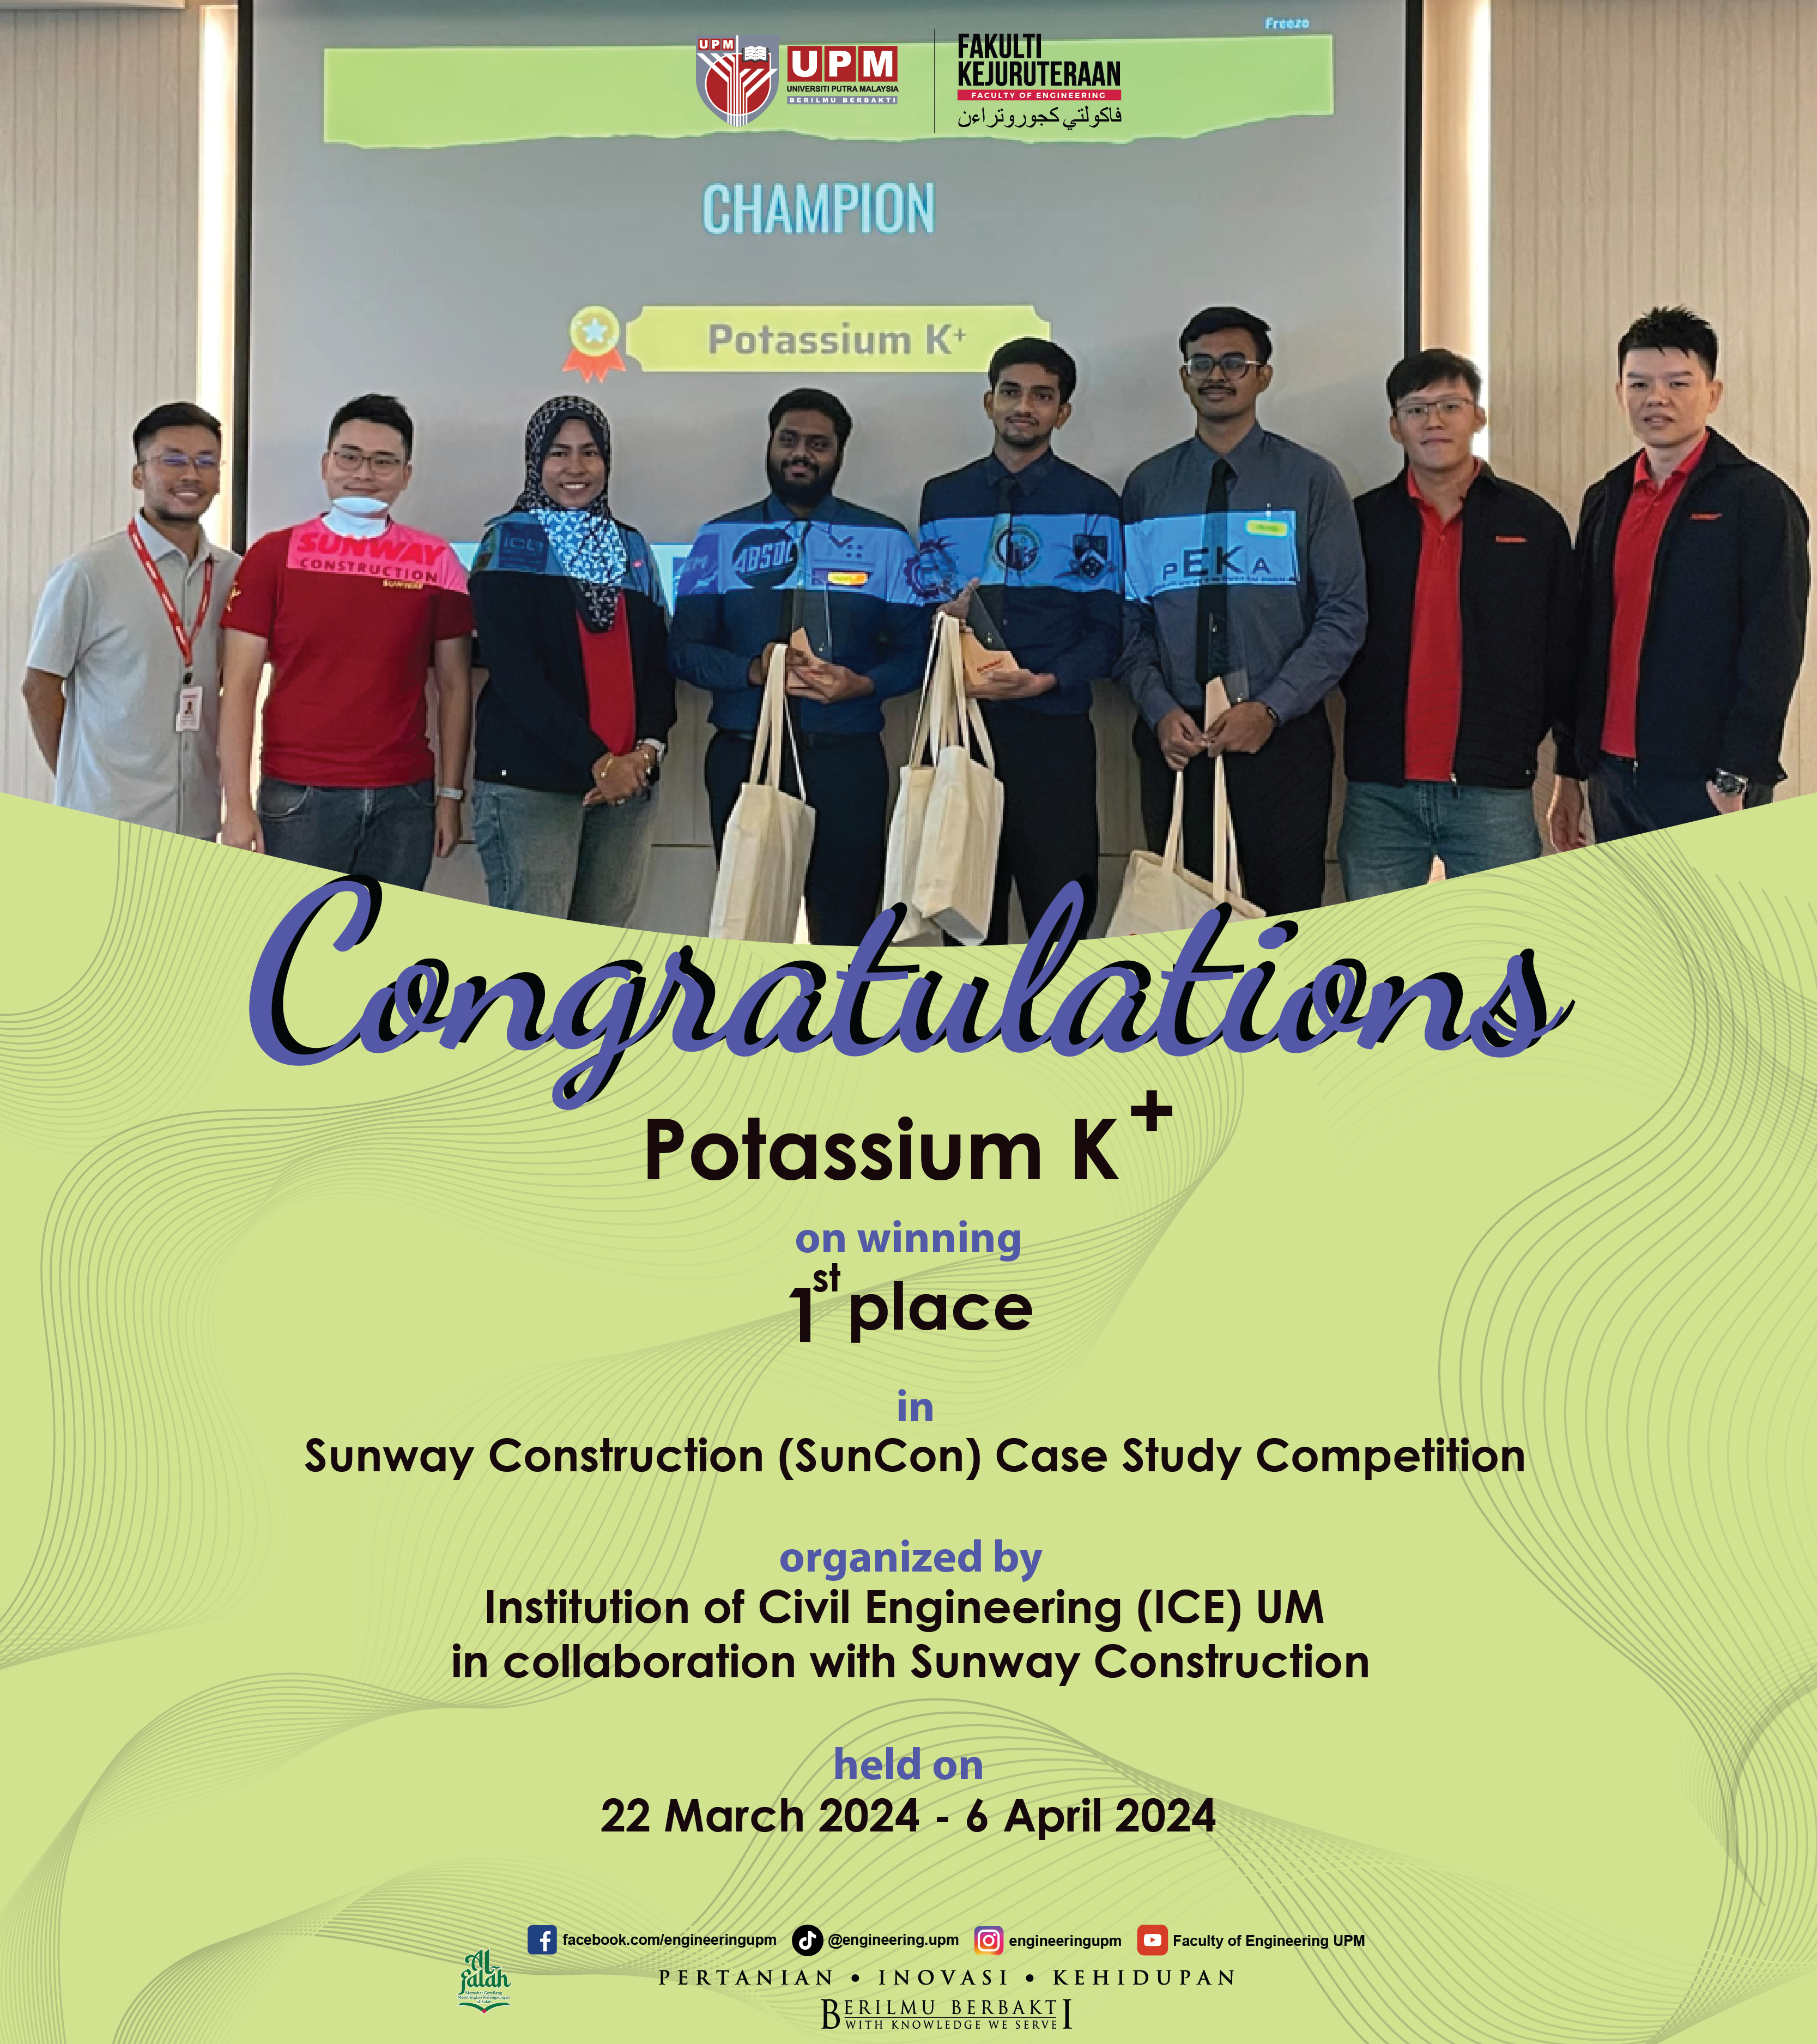 CONGRATULATIONS TO POTASSIUM K+ ON SECURING FIRST PLACE IN THE SUNWAY CONSTRUCTION (SUNCON) CASE STUDY COMPETITION